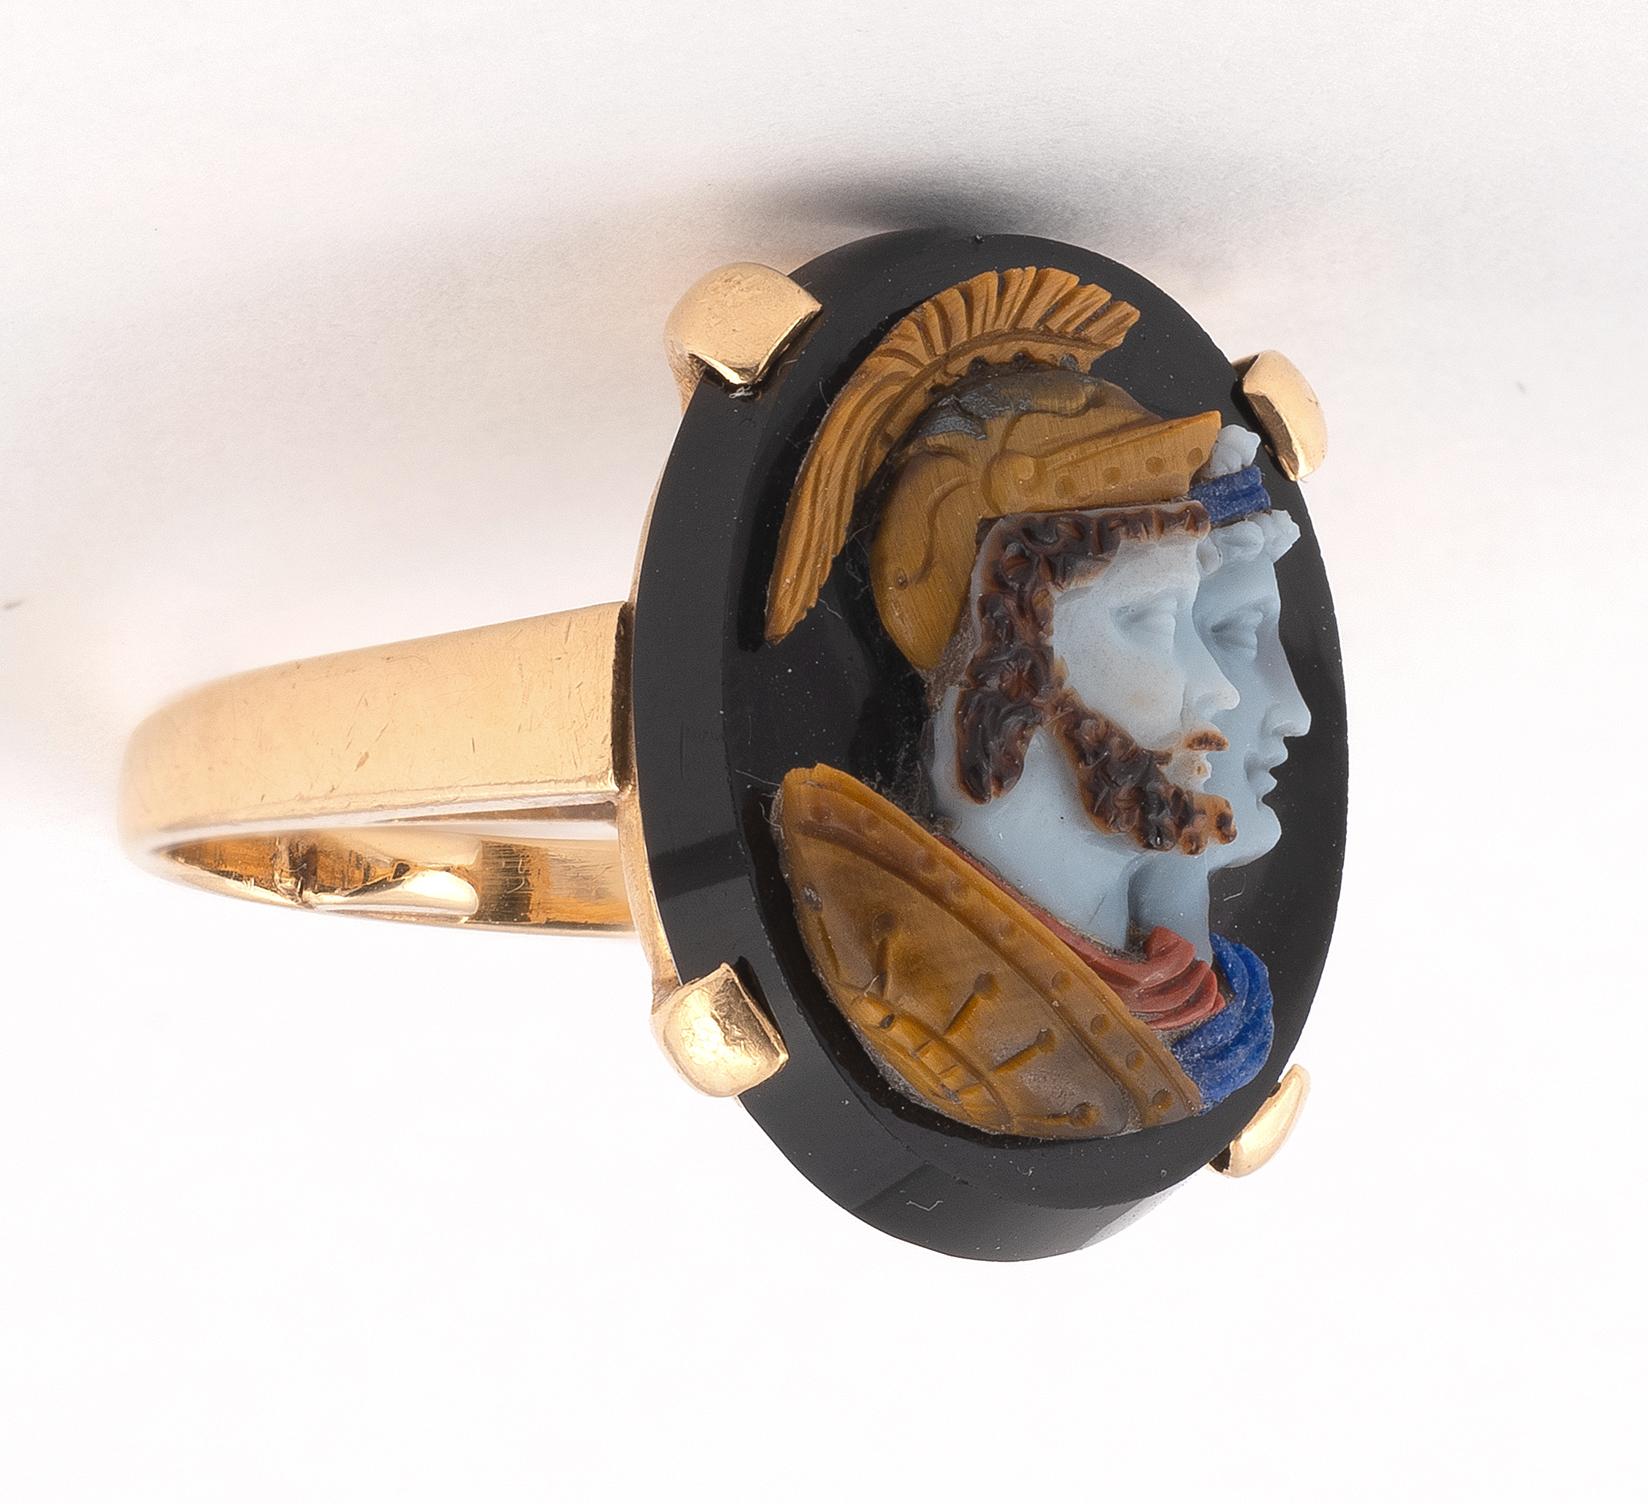 Yellow gold ring, adorned with a cameo on agate with tiger eye and lapis lazuli depicting two profiles of soldiers. Ring size: 7
Weight : 8.7g